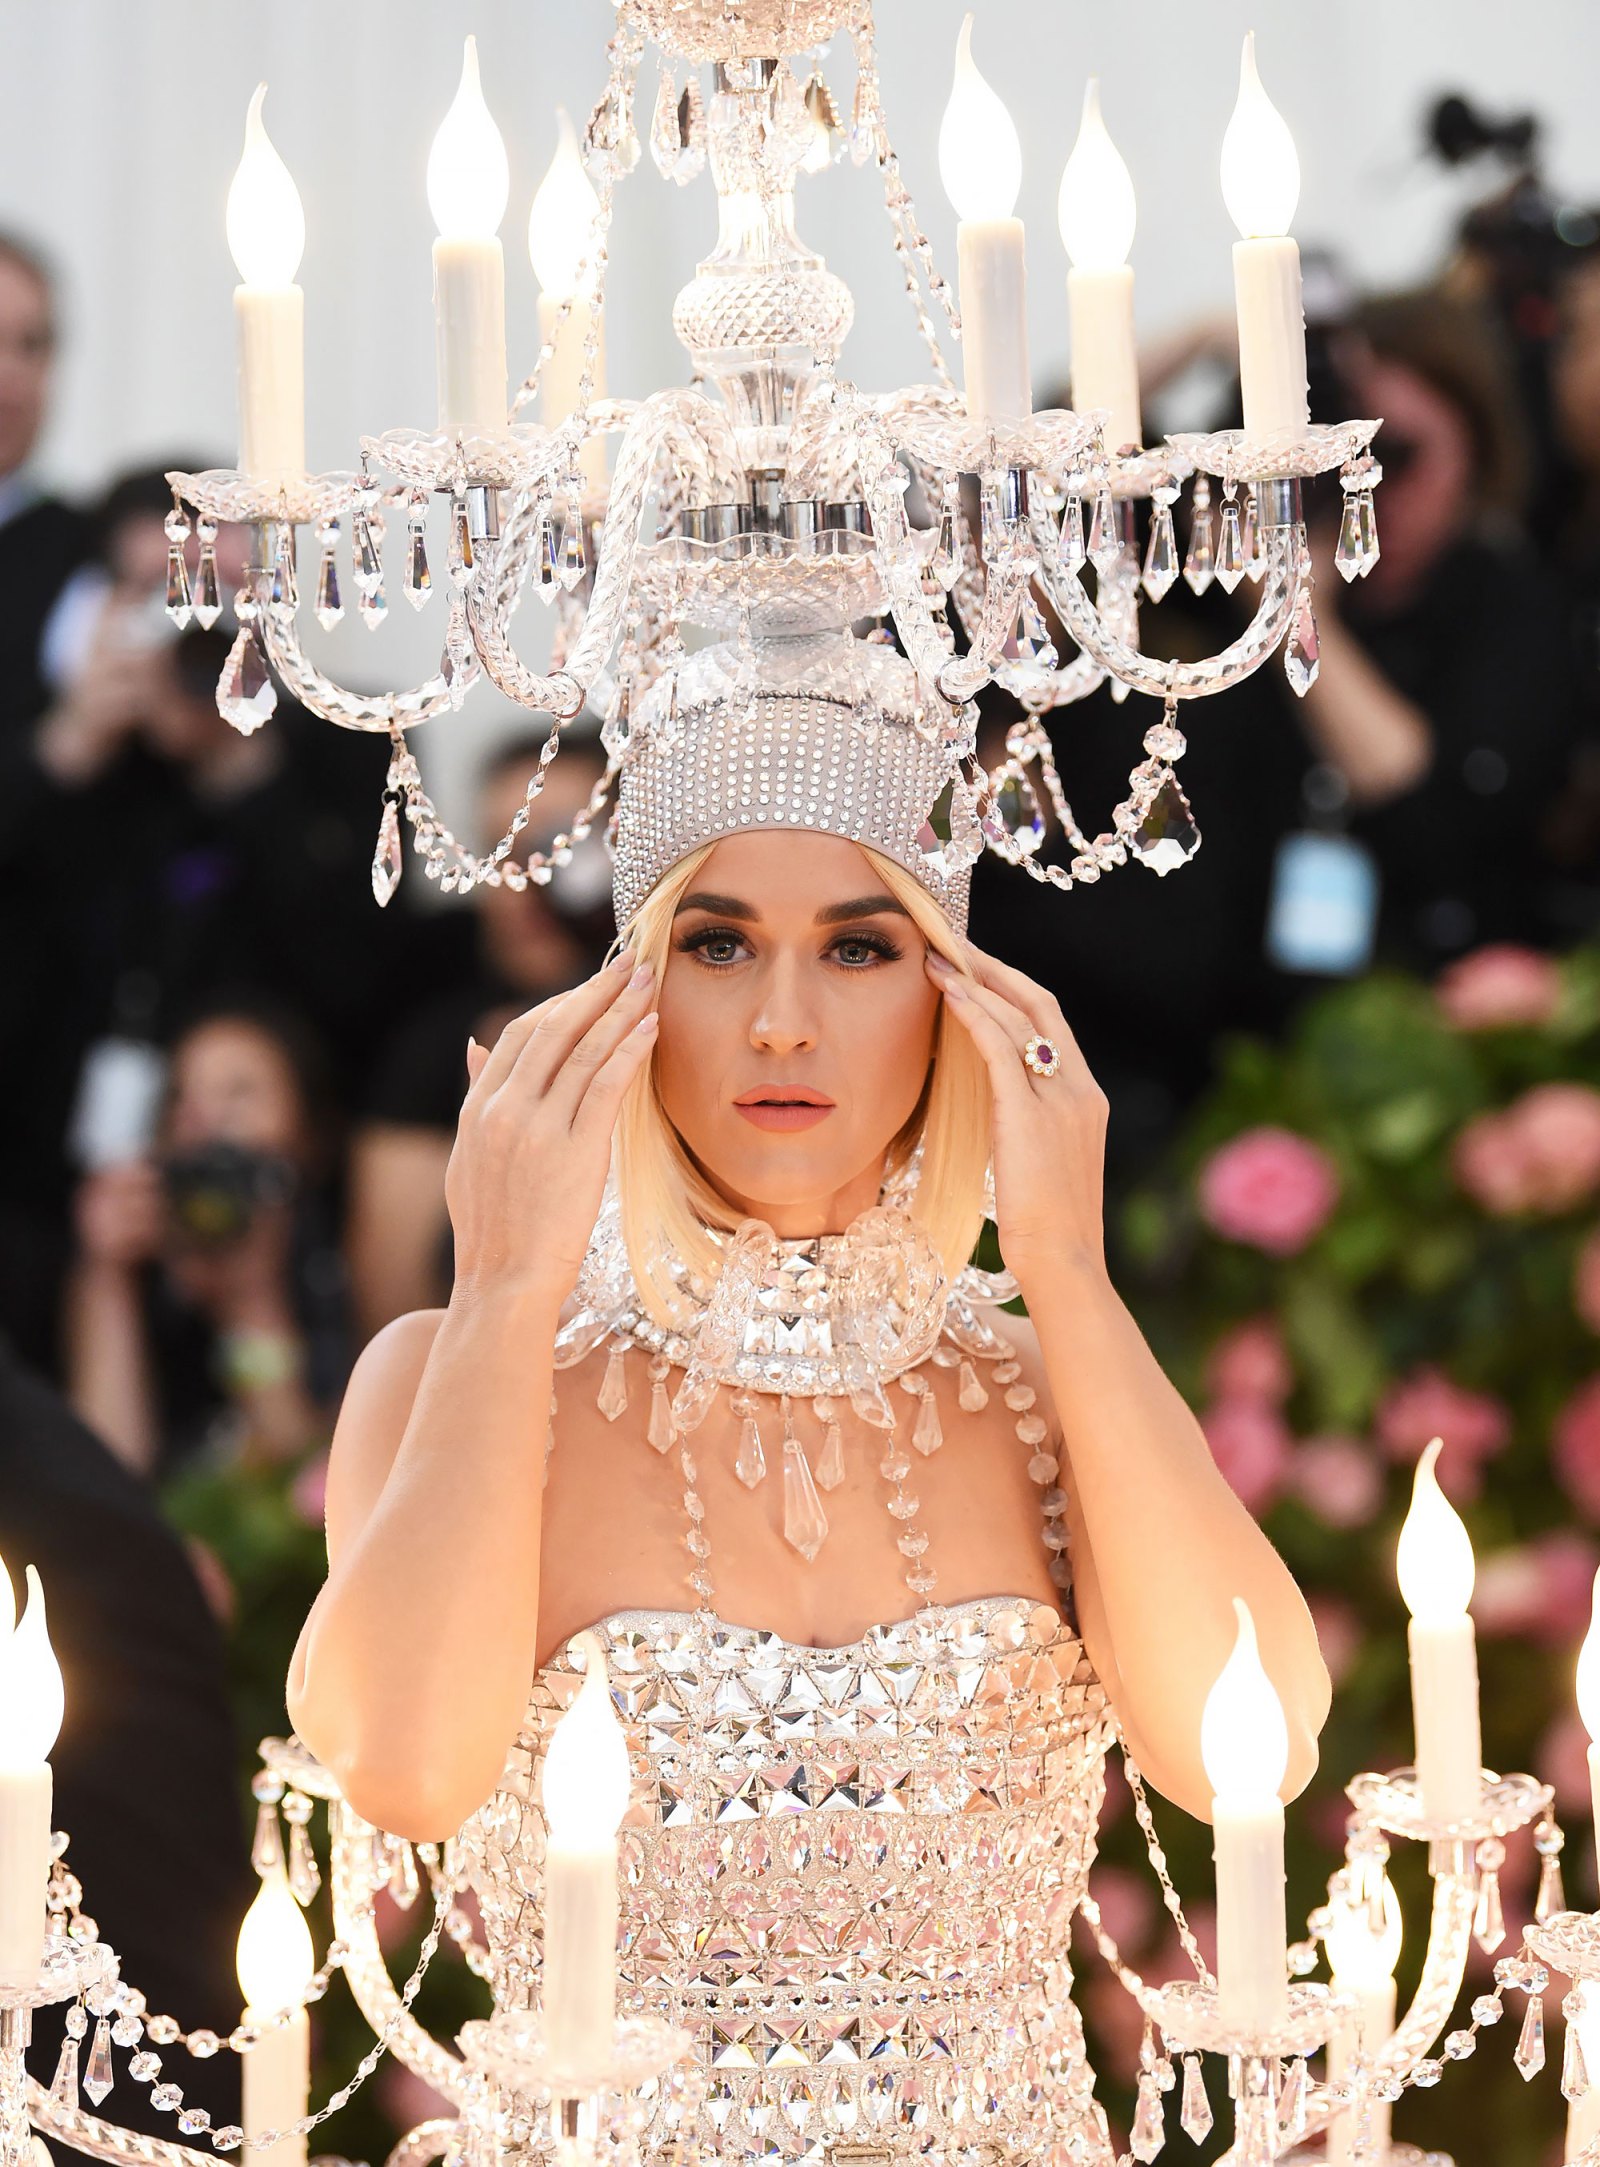 Chandelier Hats! Smurfette Dresses! Katy Perry's Craziest Style Moments  Through the Years - Us Weekly